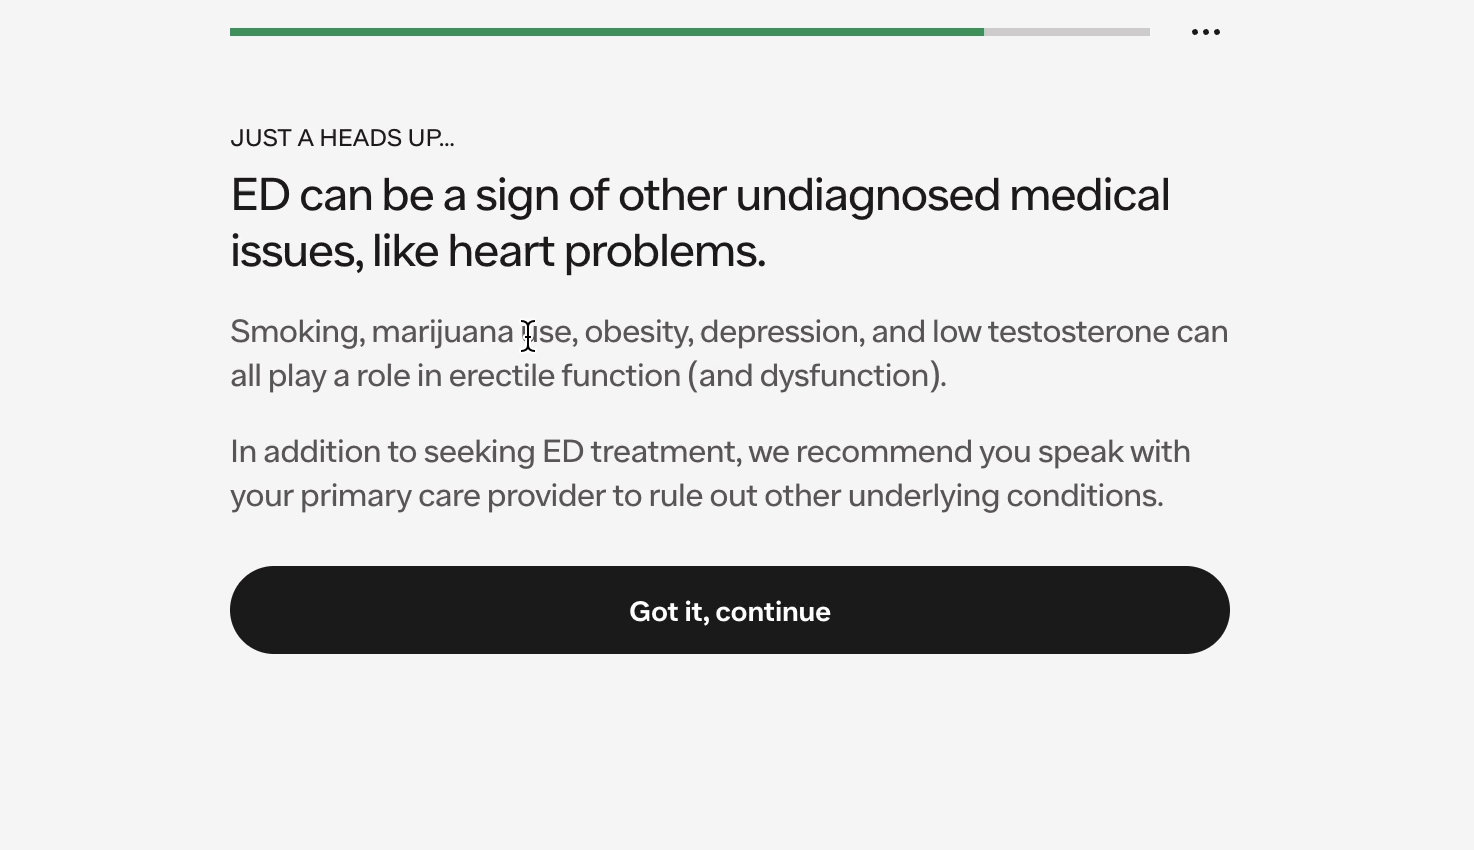  Notifying users that ED can be a sign of other undiagnosed medical issues 